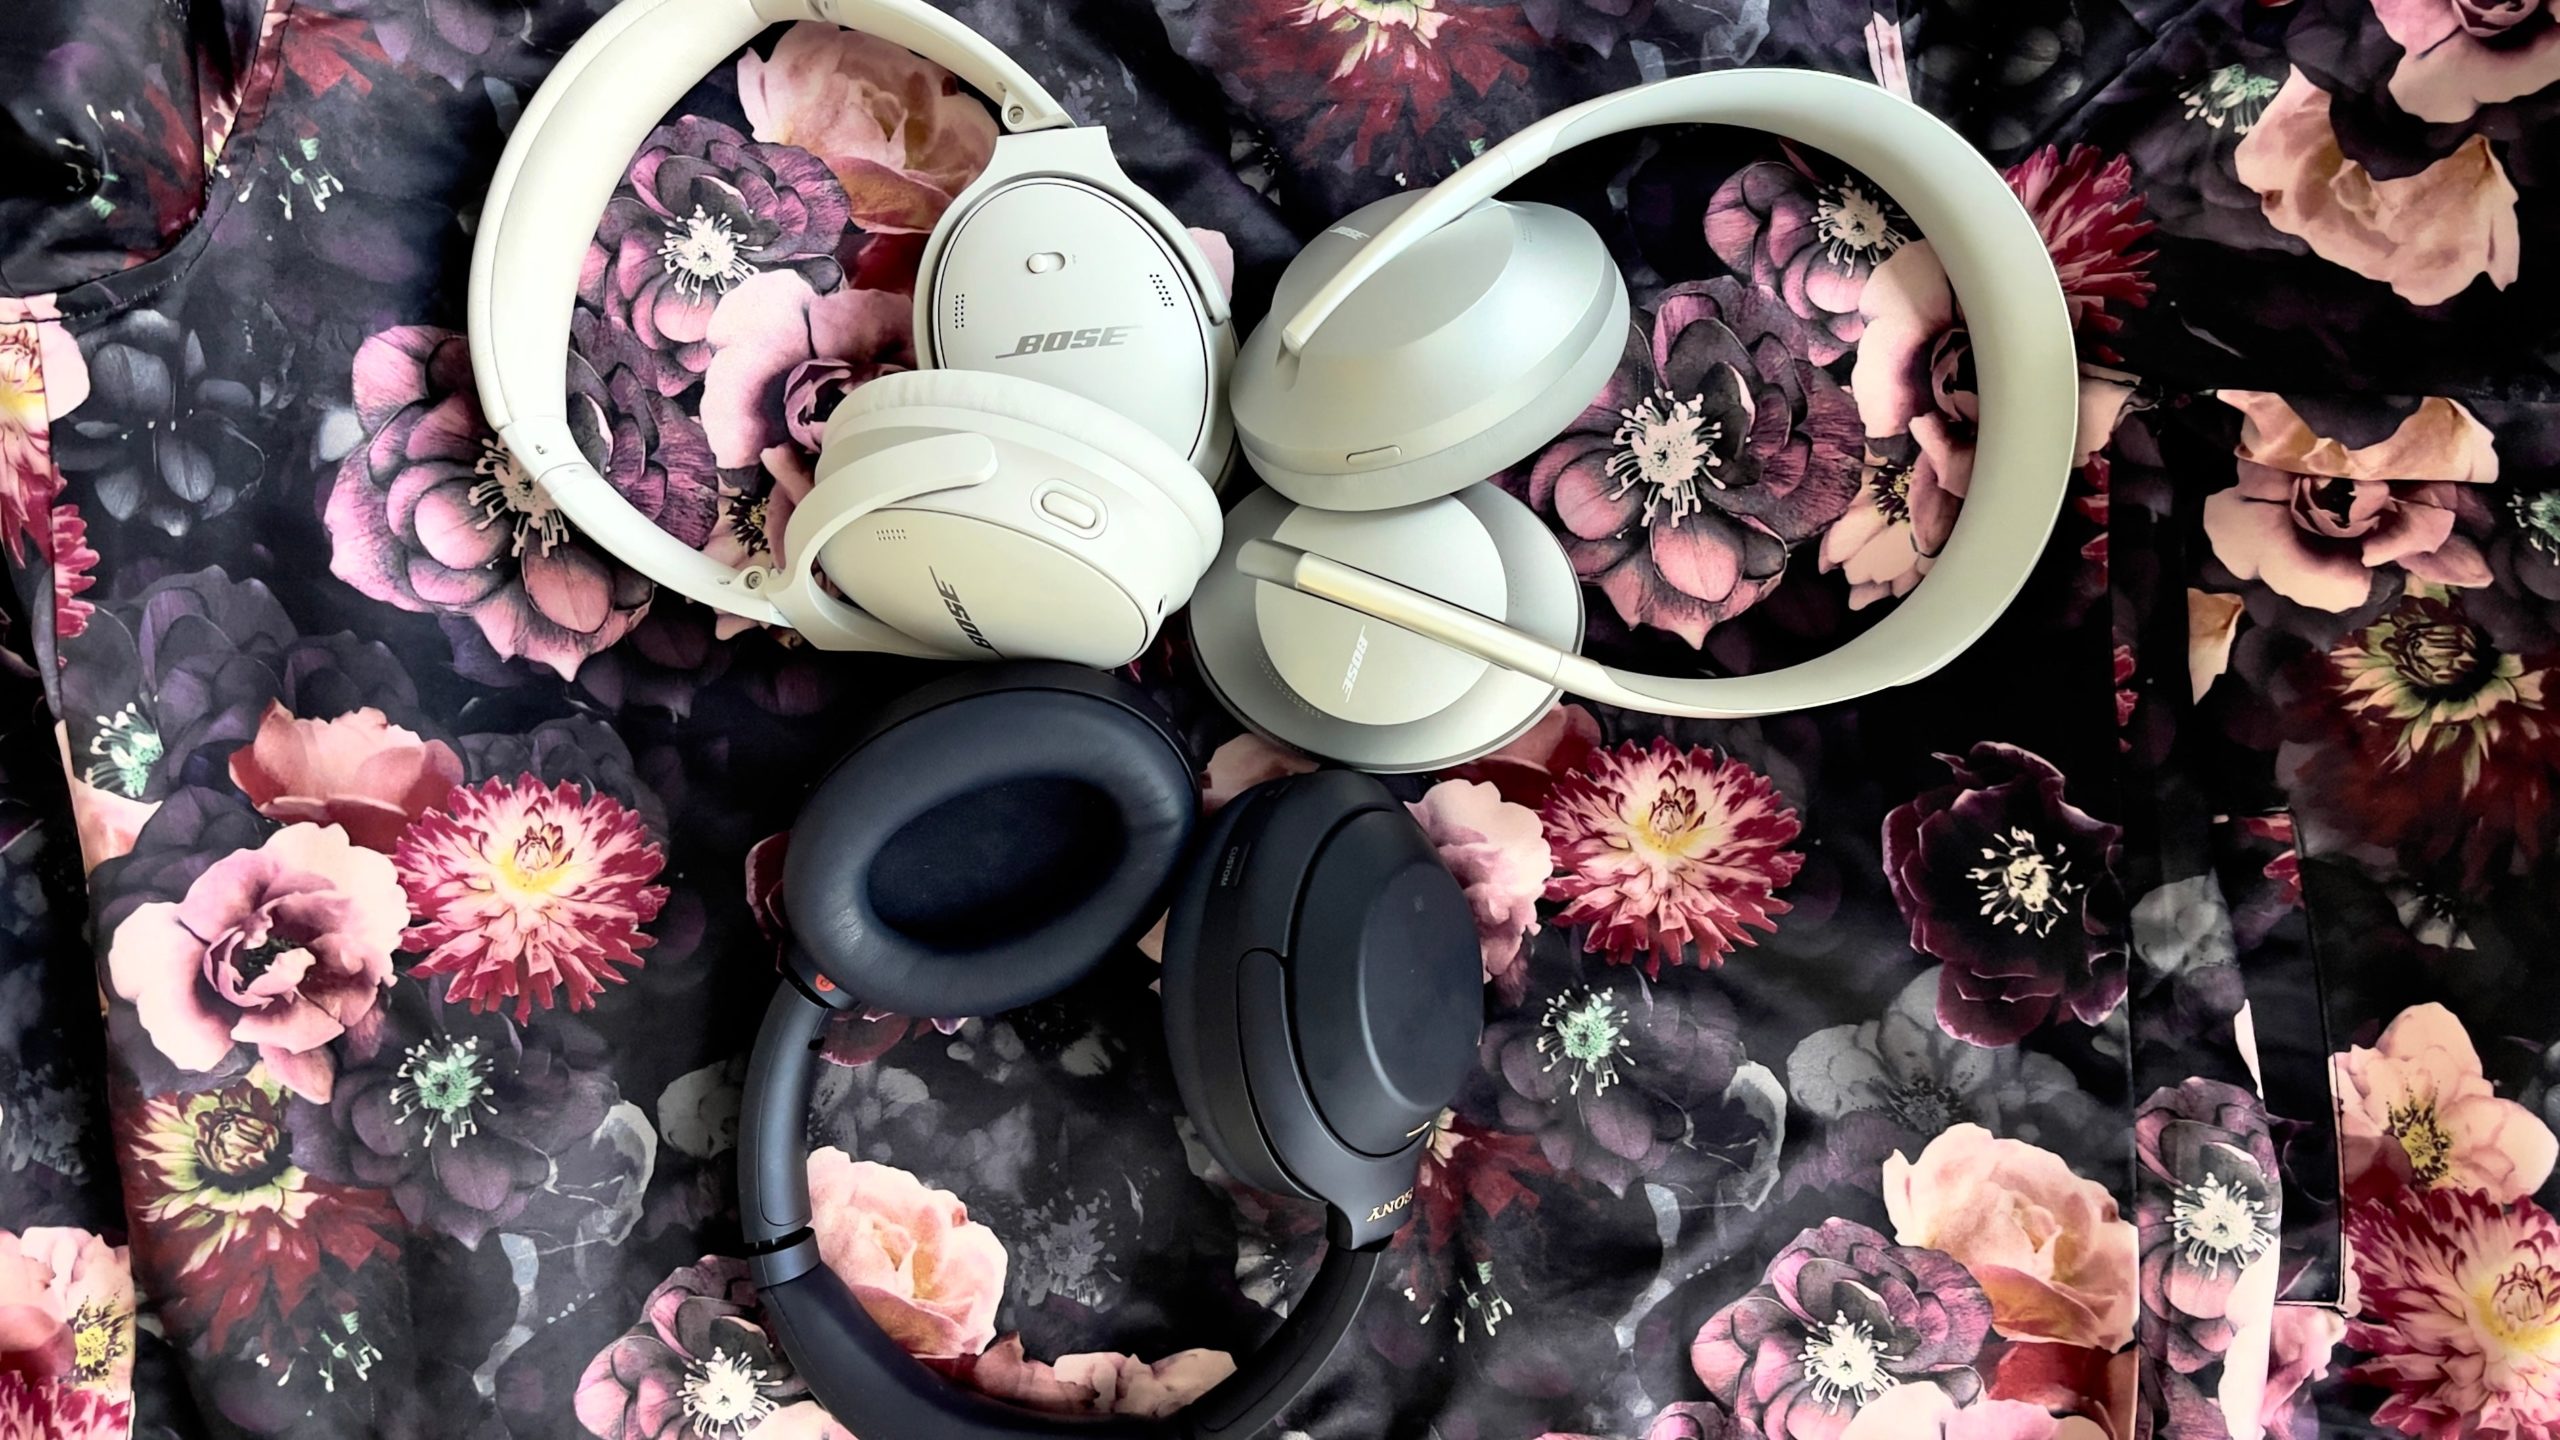 I regret to inform you, they're all good. L to R: Bose QC 45, Bose NC 700, Sony WH-1000XM4 (Photo: Victoria Song/Gizmodo)